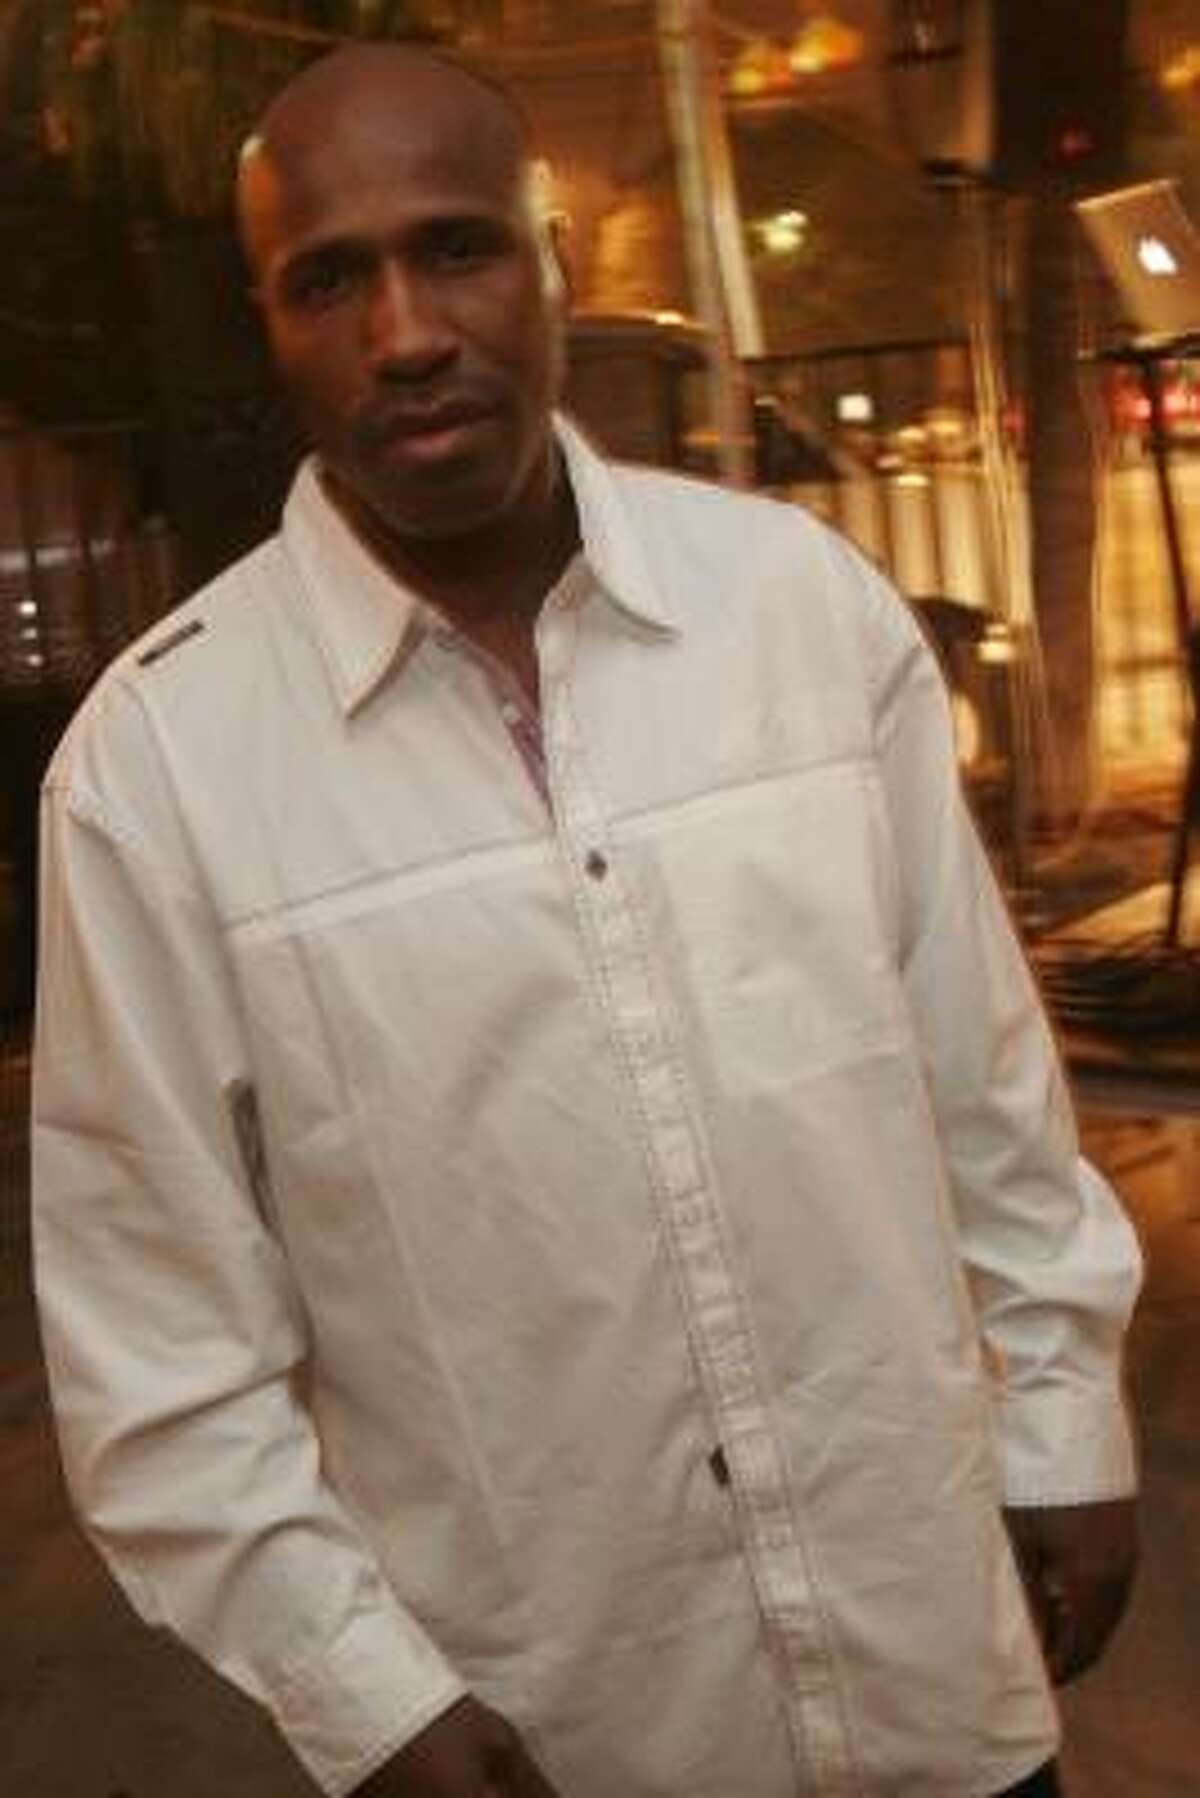 William James Dennis — better known as Willie D of the rap group the Geto Boys, pictured here in 2006 — was arrested yesterday at Bush Intercontinental Airport, where he was returning from an overseas trip.